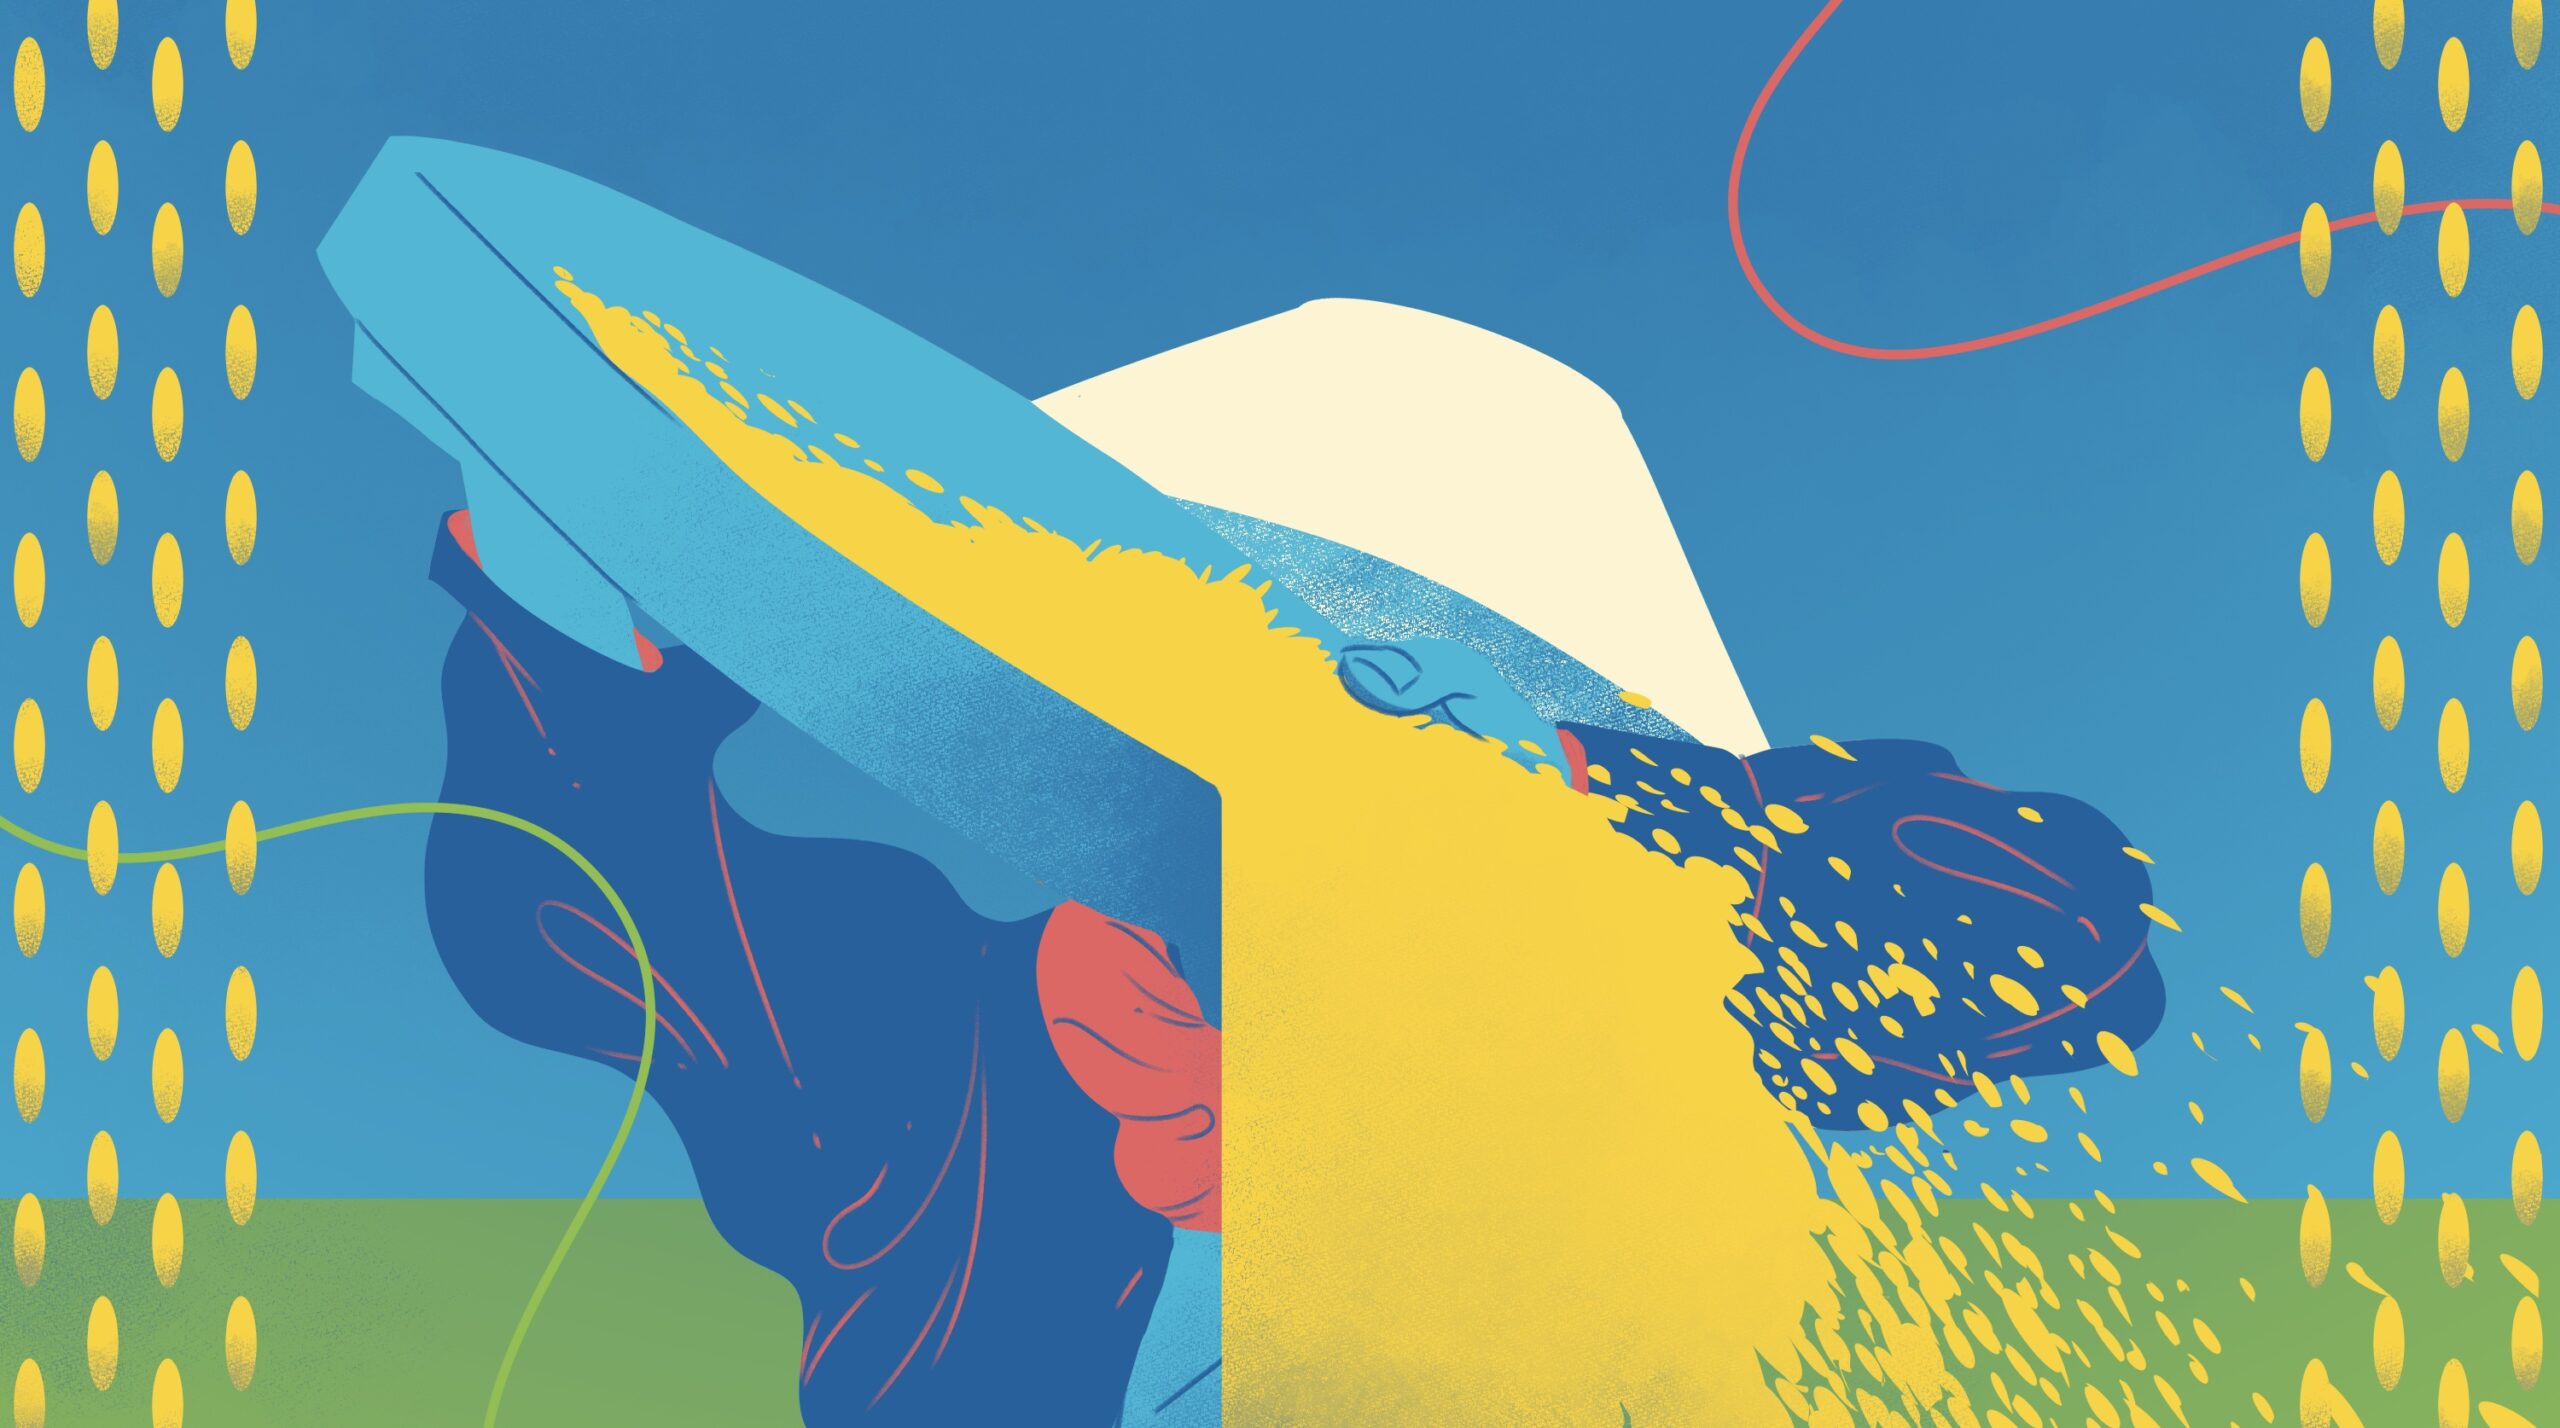 A person wearing a hat pours golden rice onto the field in this abstract illustration by Frauke Berger.